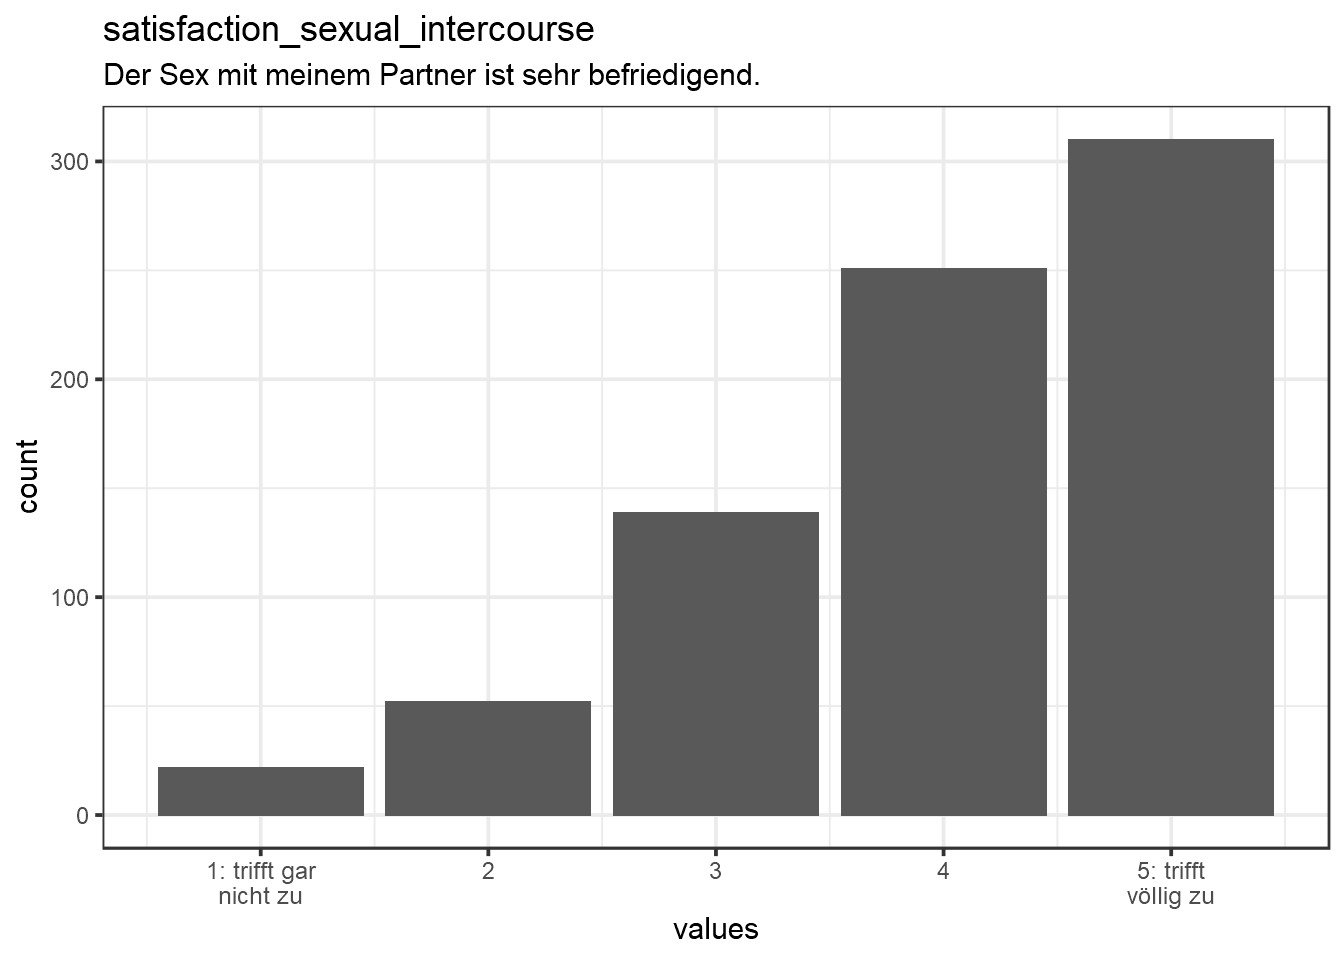 Distribution of values for satisfaction_sexual_intercourse